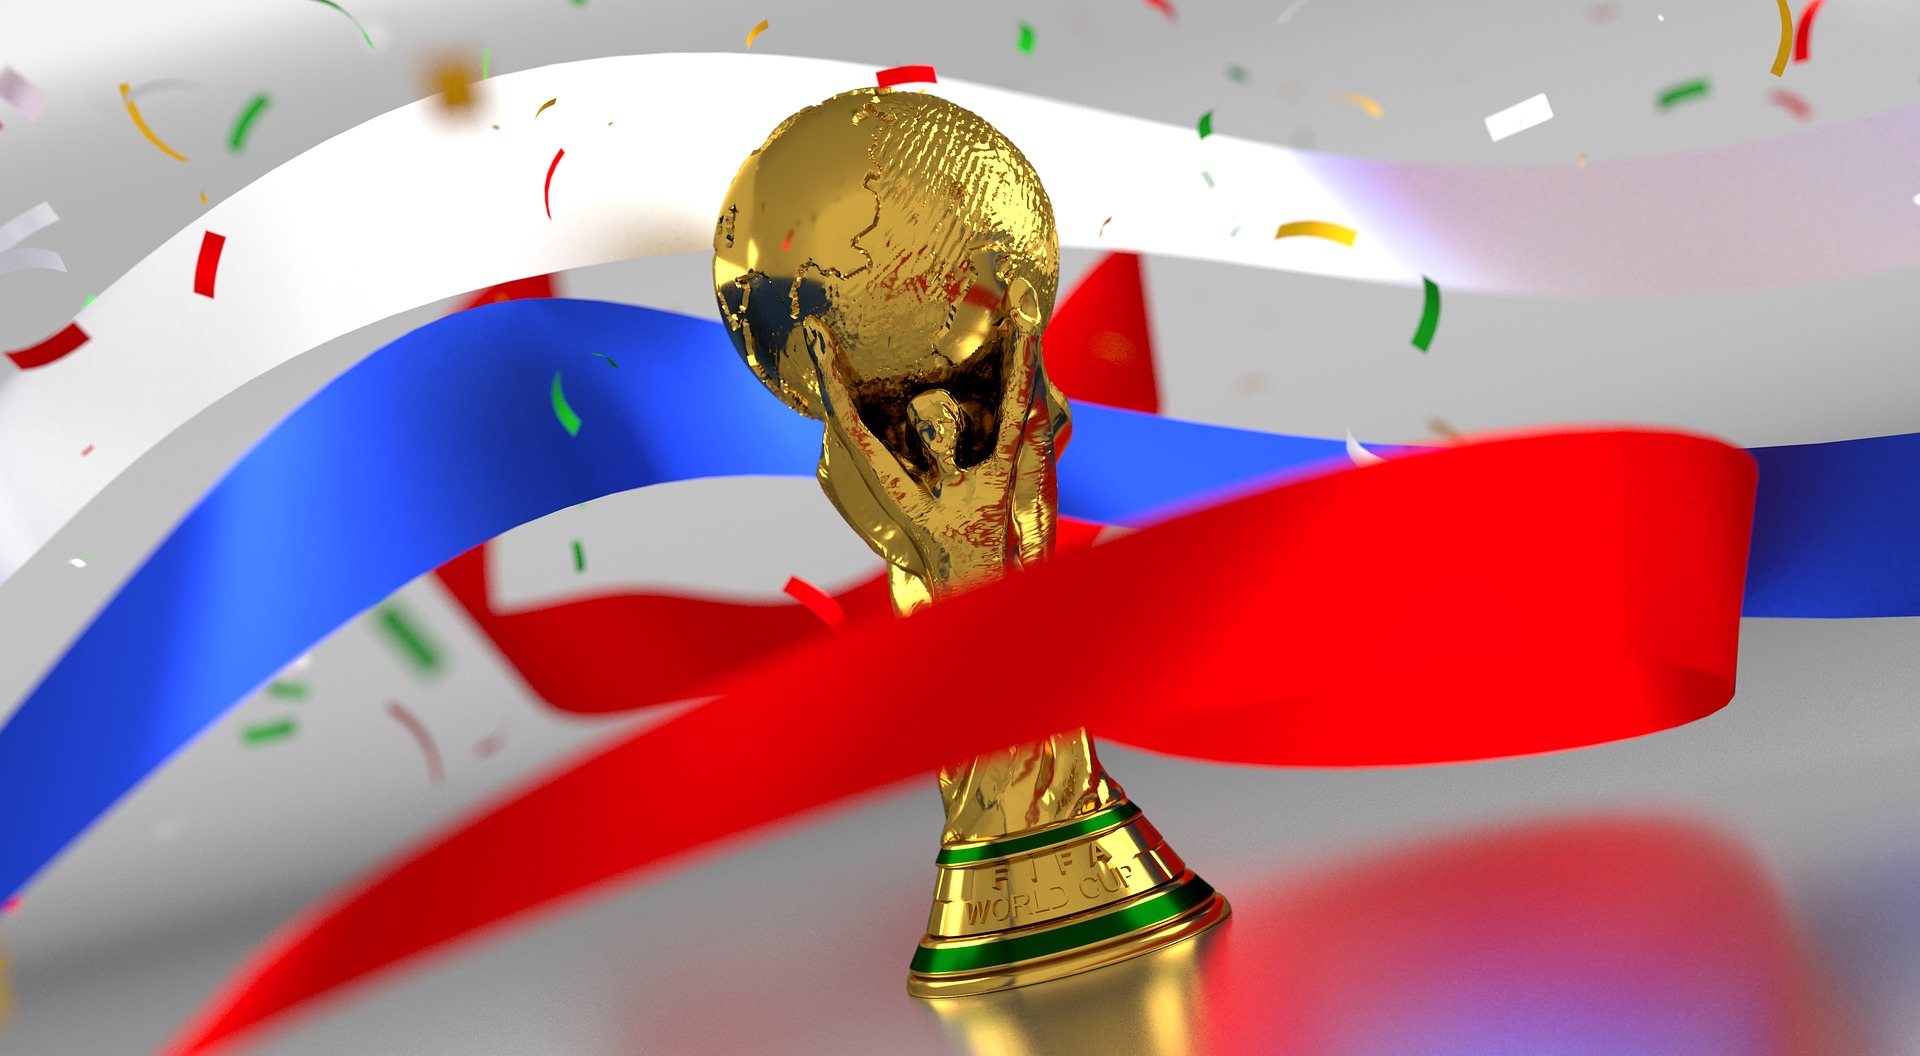 World cup is coming on next 2022 year